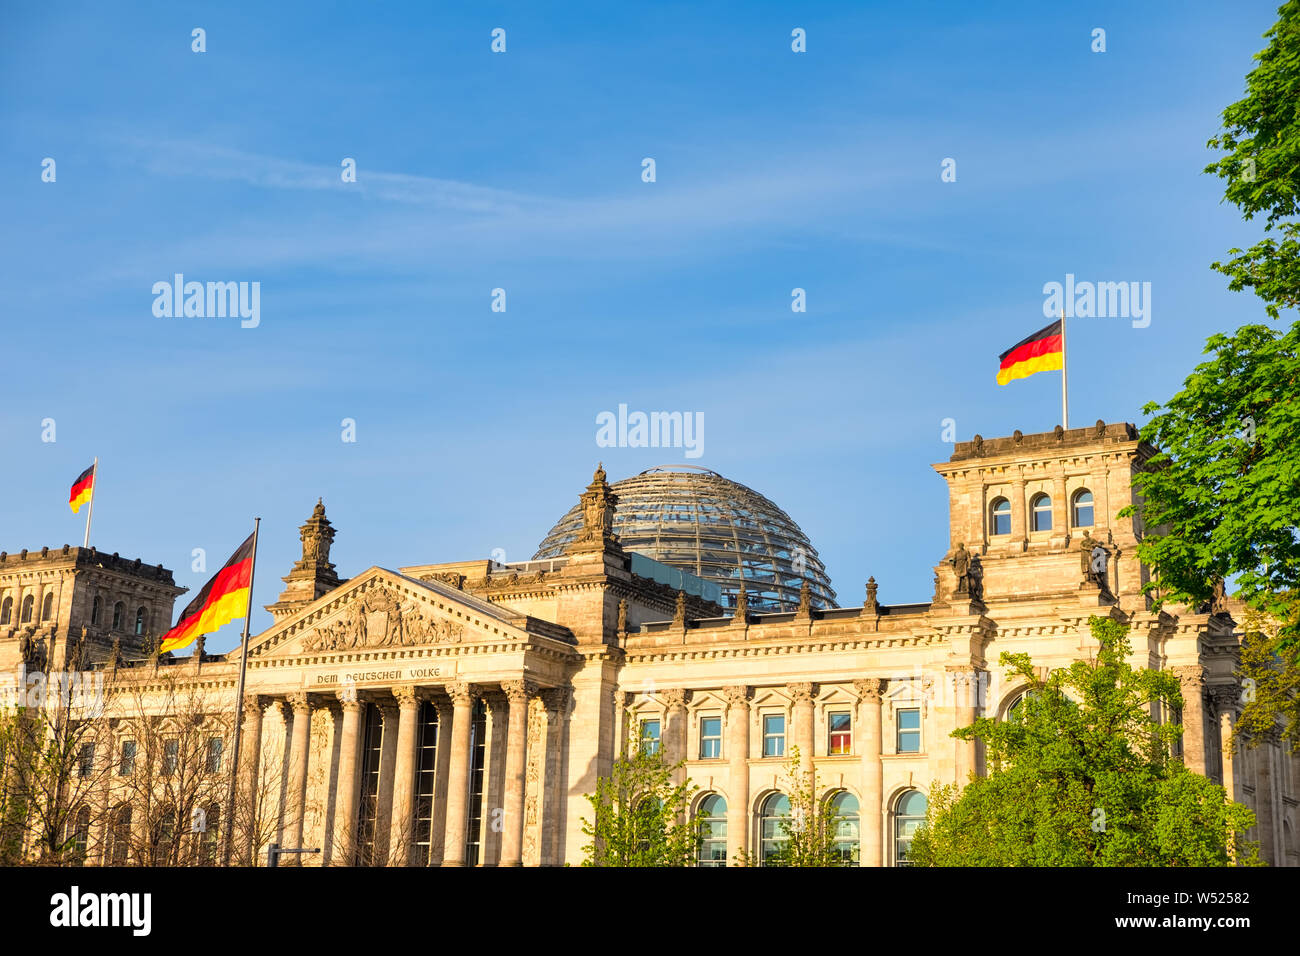 The Reichstag building in Berlin, Germany with the German flag. A famous landmark and travel destination for tourists Stock Photo